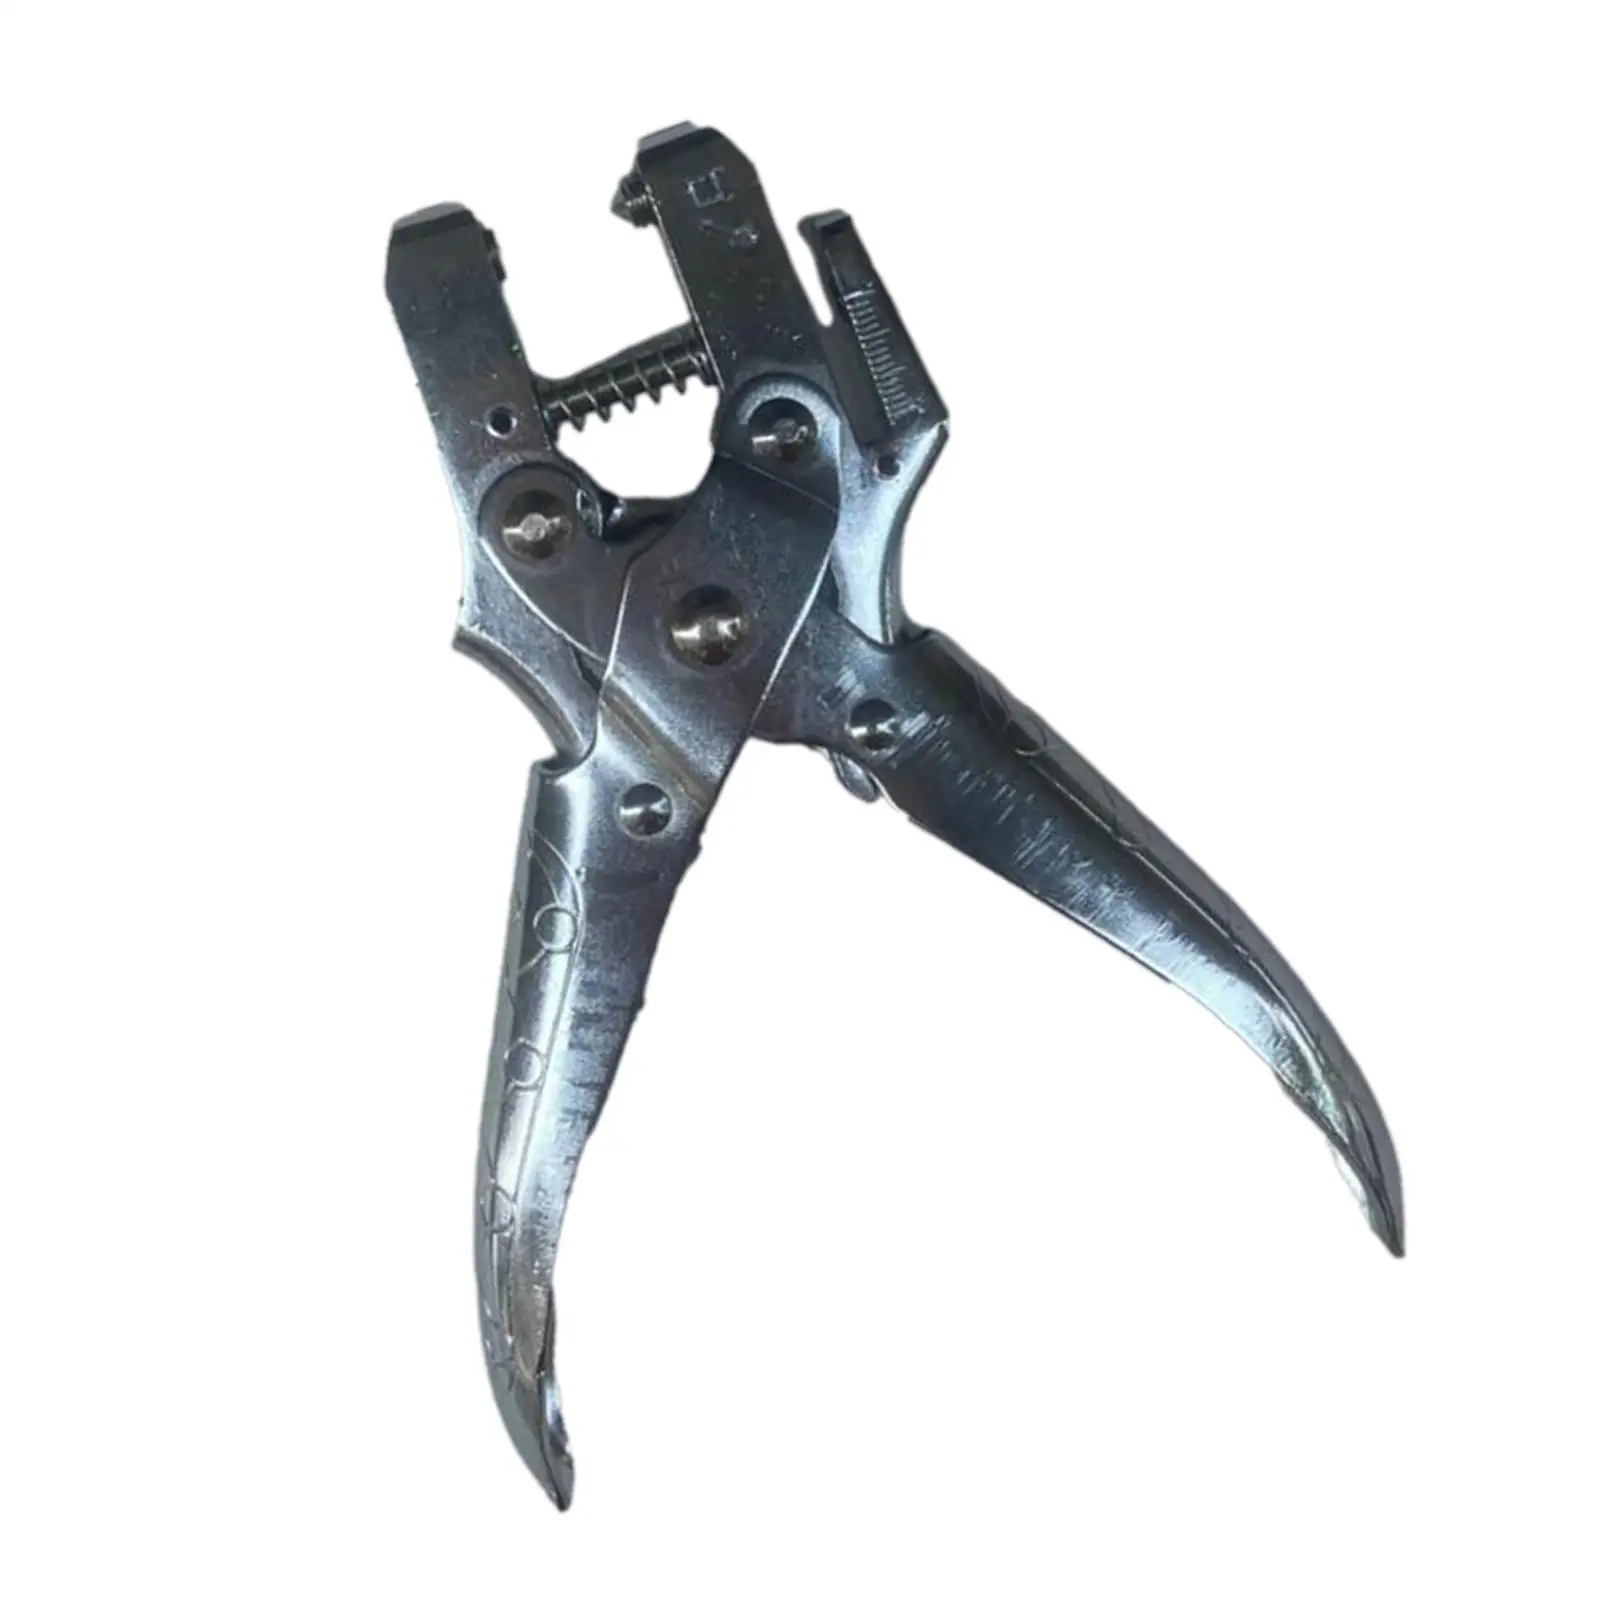 Stainless Steel Pliers for Badminton Racket, Grommet Tool, Racquet Racket Threading Pincer Forceps